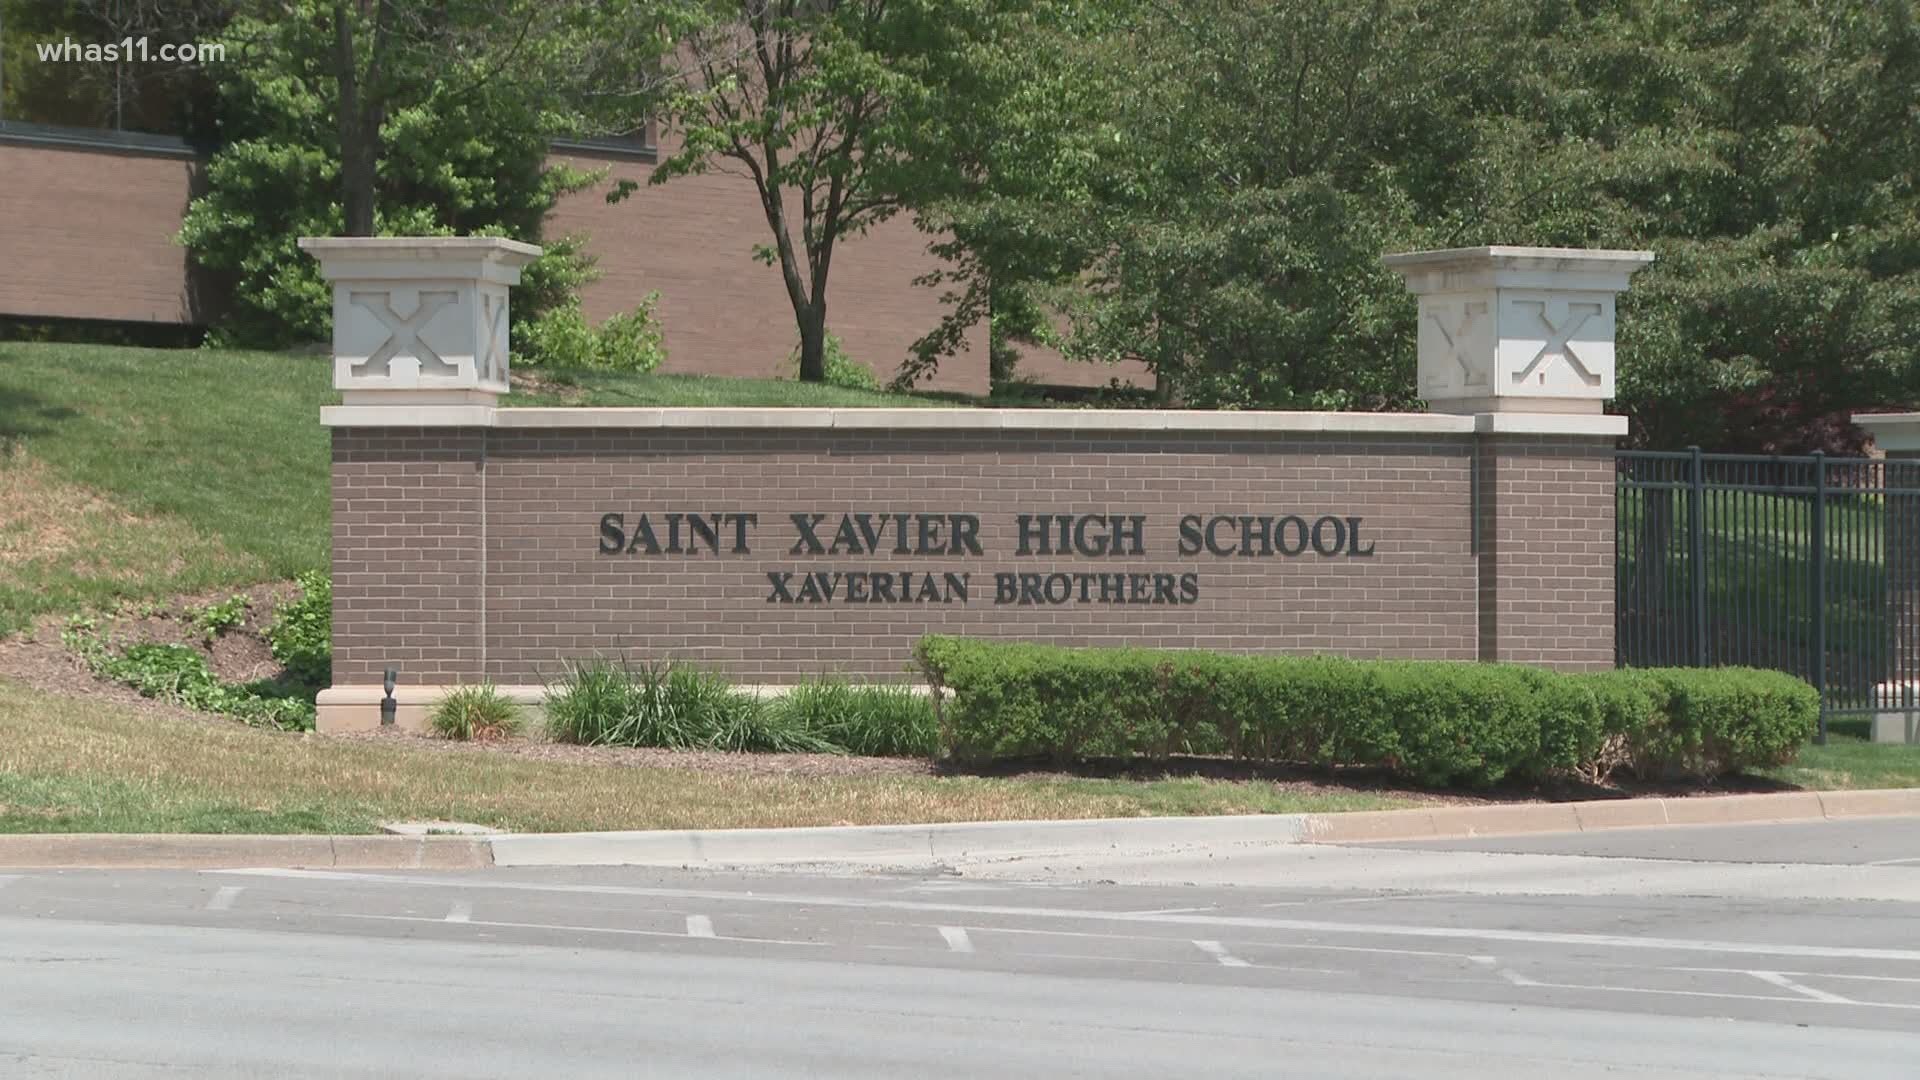 St. Xavier High School said officials are looking into a "disturbing video recorded off campus involving a few" students.